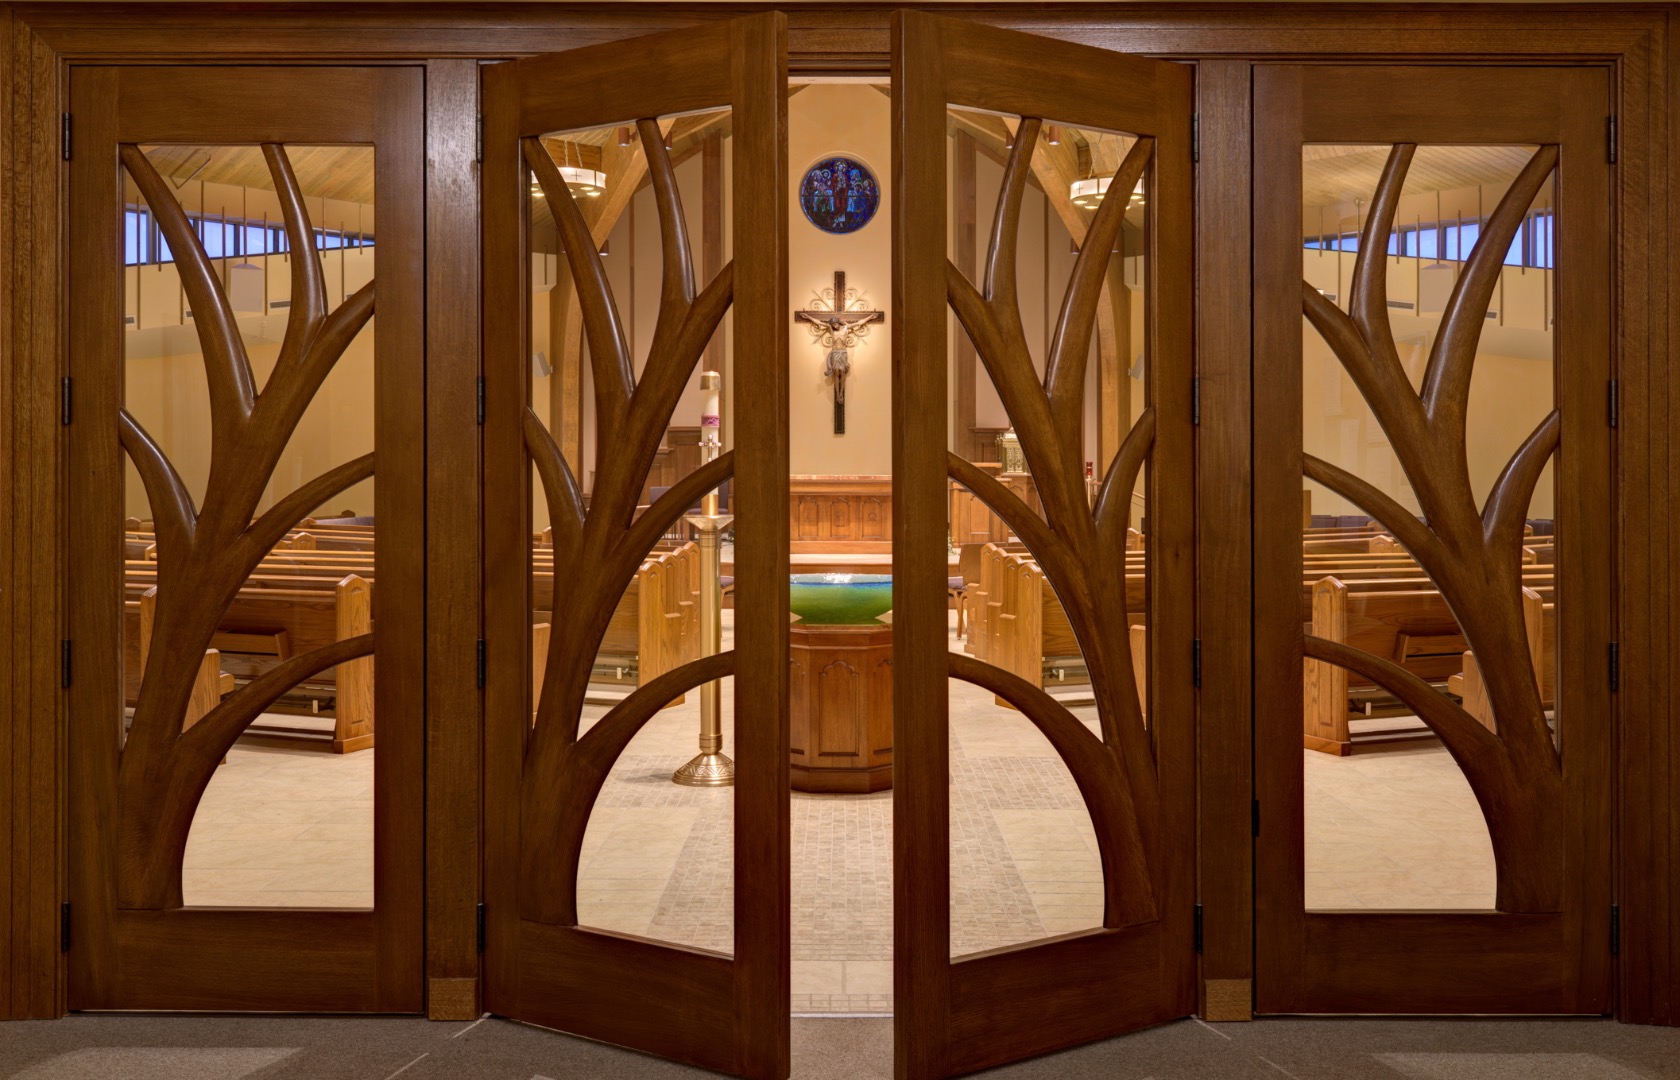 New custom-designed carved wood doors to the Worship Space